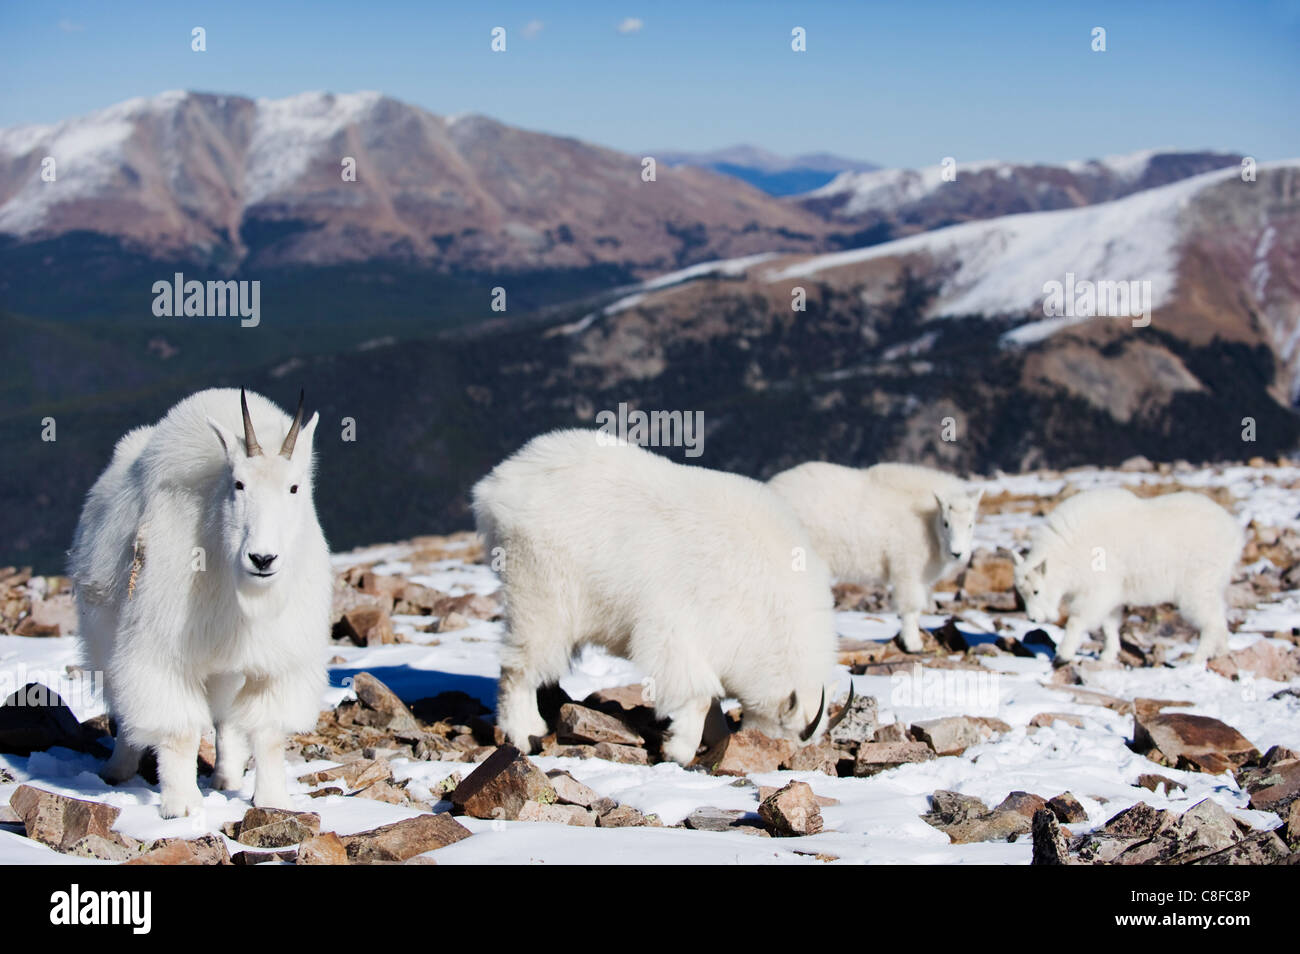 Mountain goat (antelope) in winter coats on Quandary Peak, a mountain above 14000 feet, known as a 14er, Colorado, USA Stock Photo